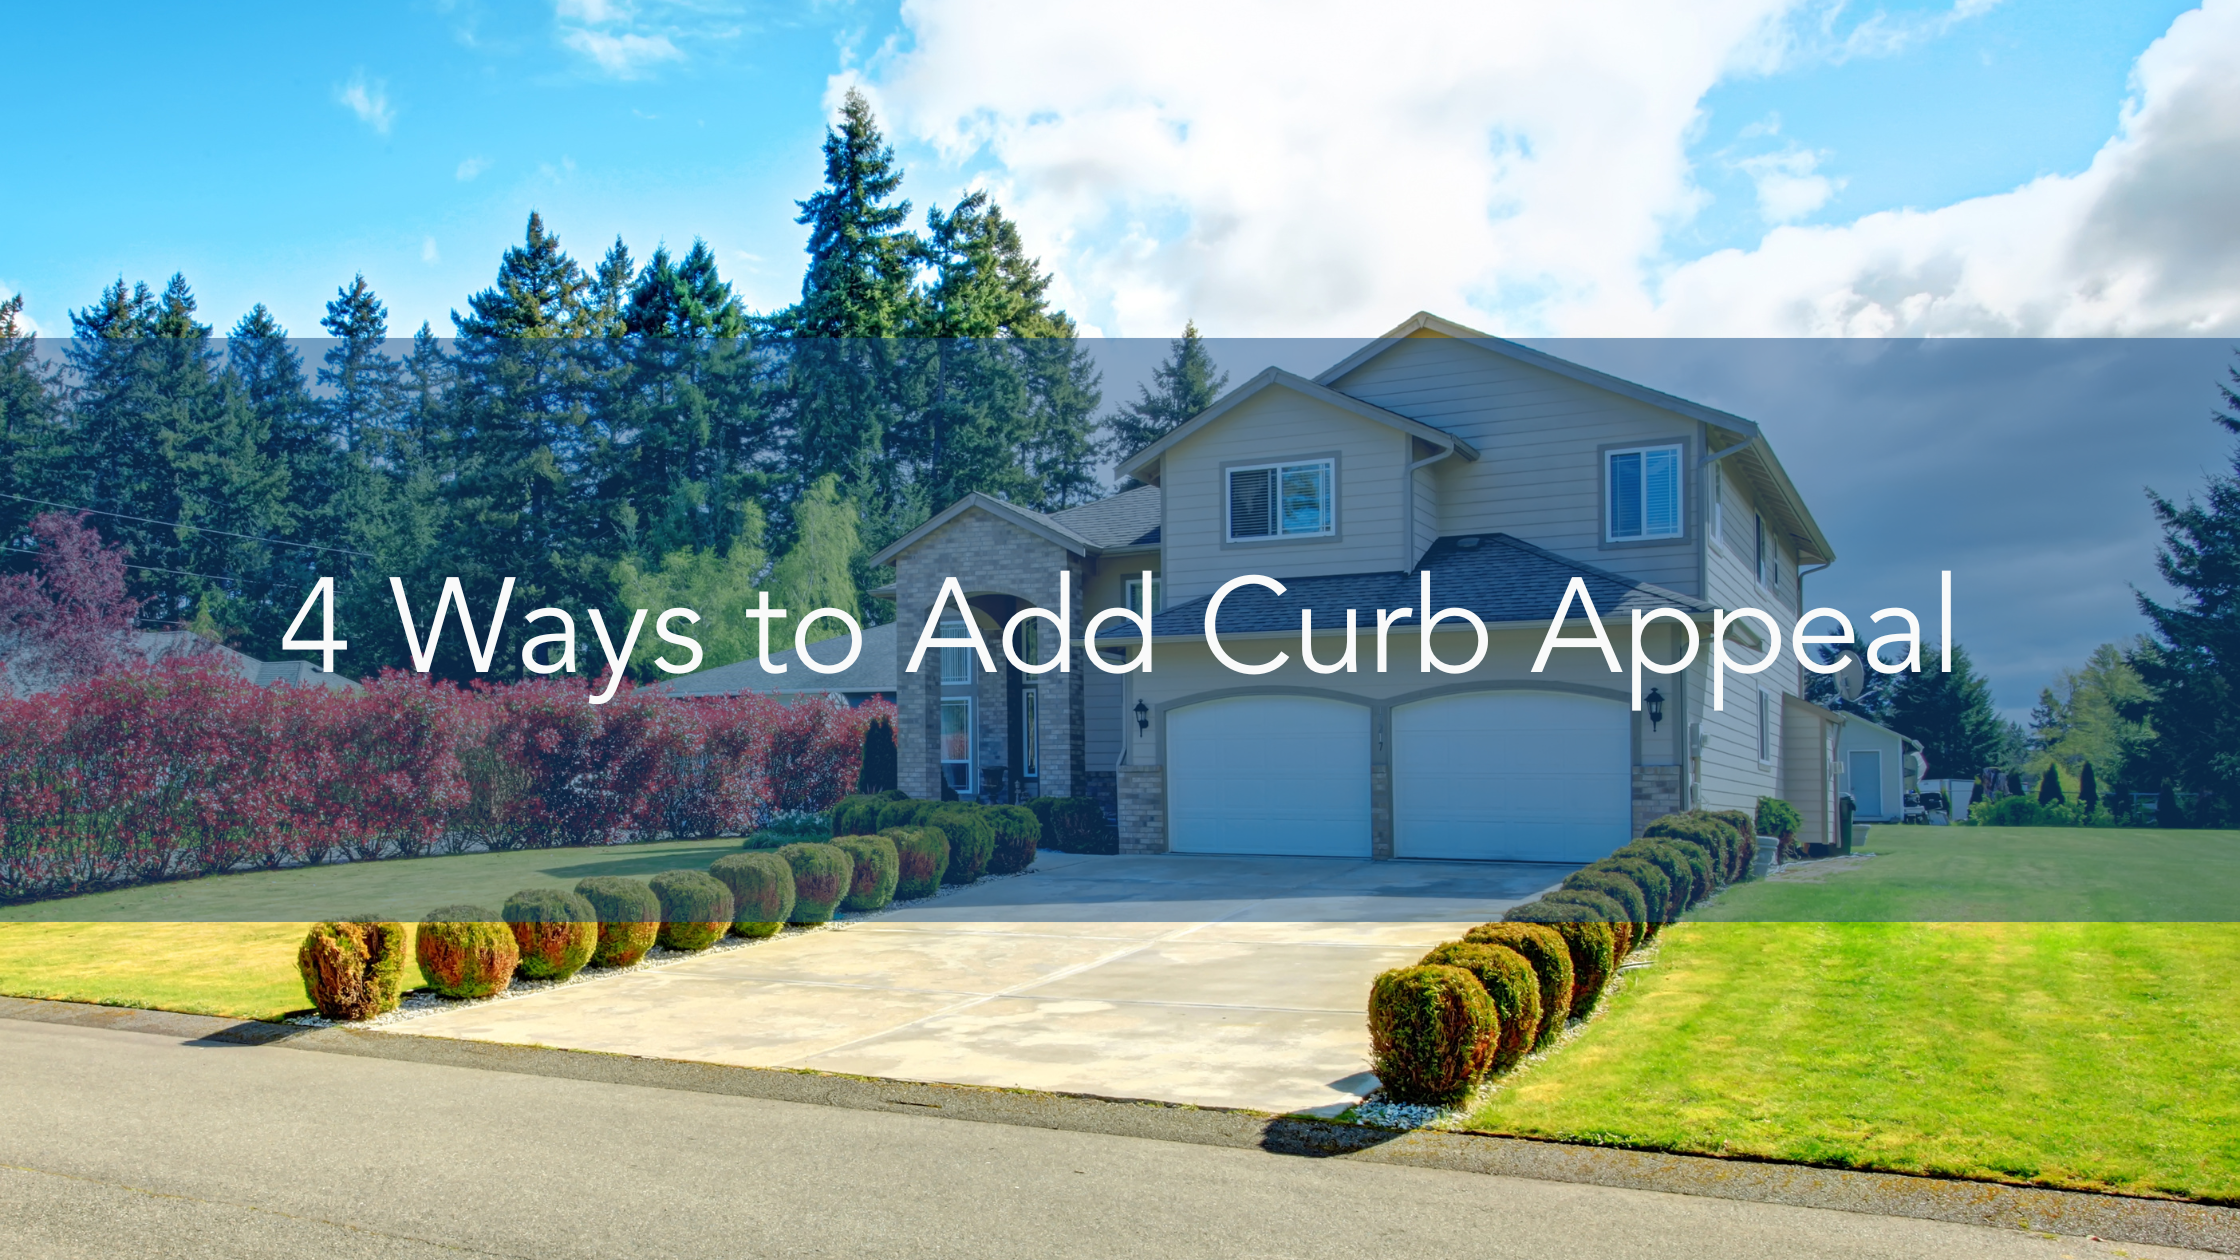 https://handymanconnection.com/wp-content/uploads/2022/09/4-Ways-to-Add-Curb-Appeal.png